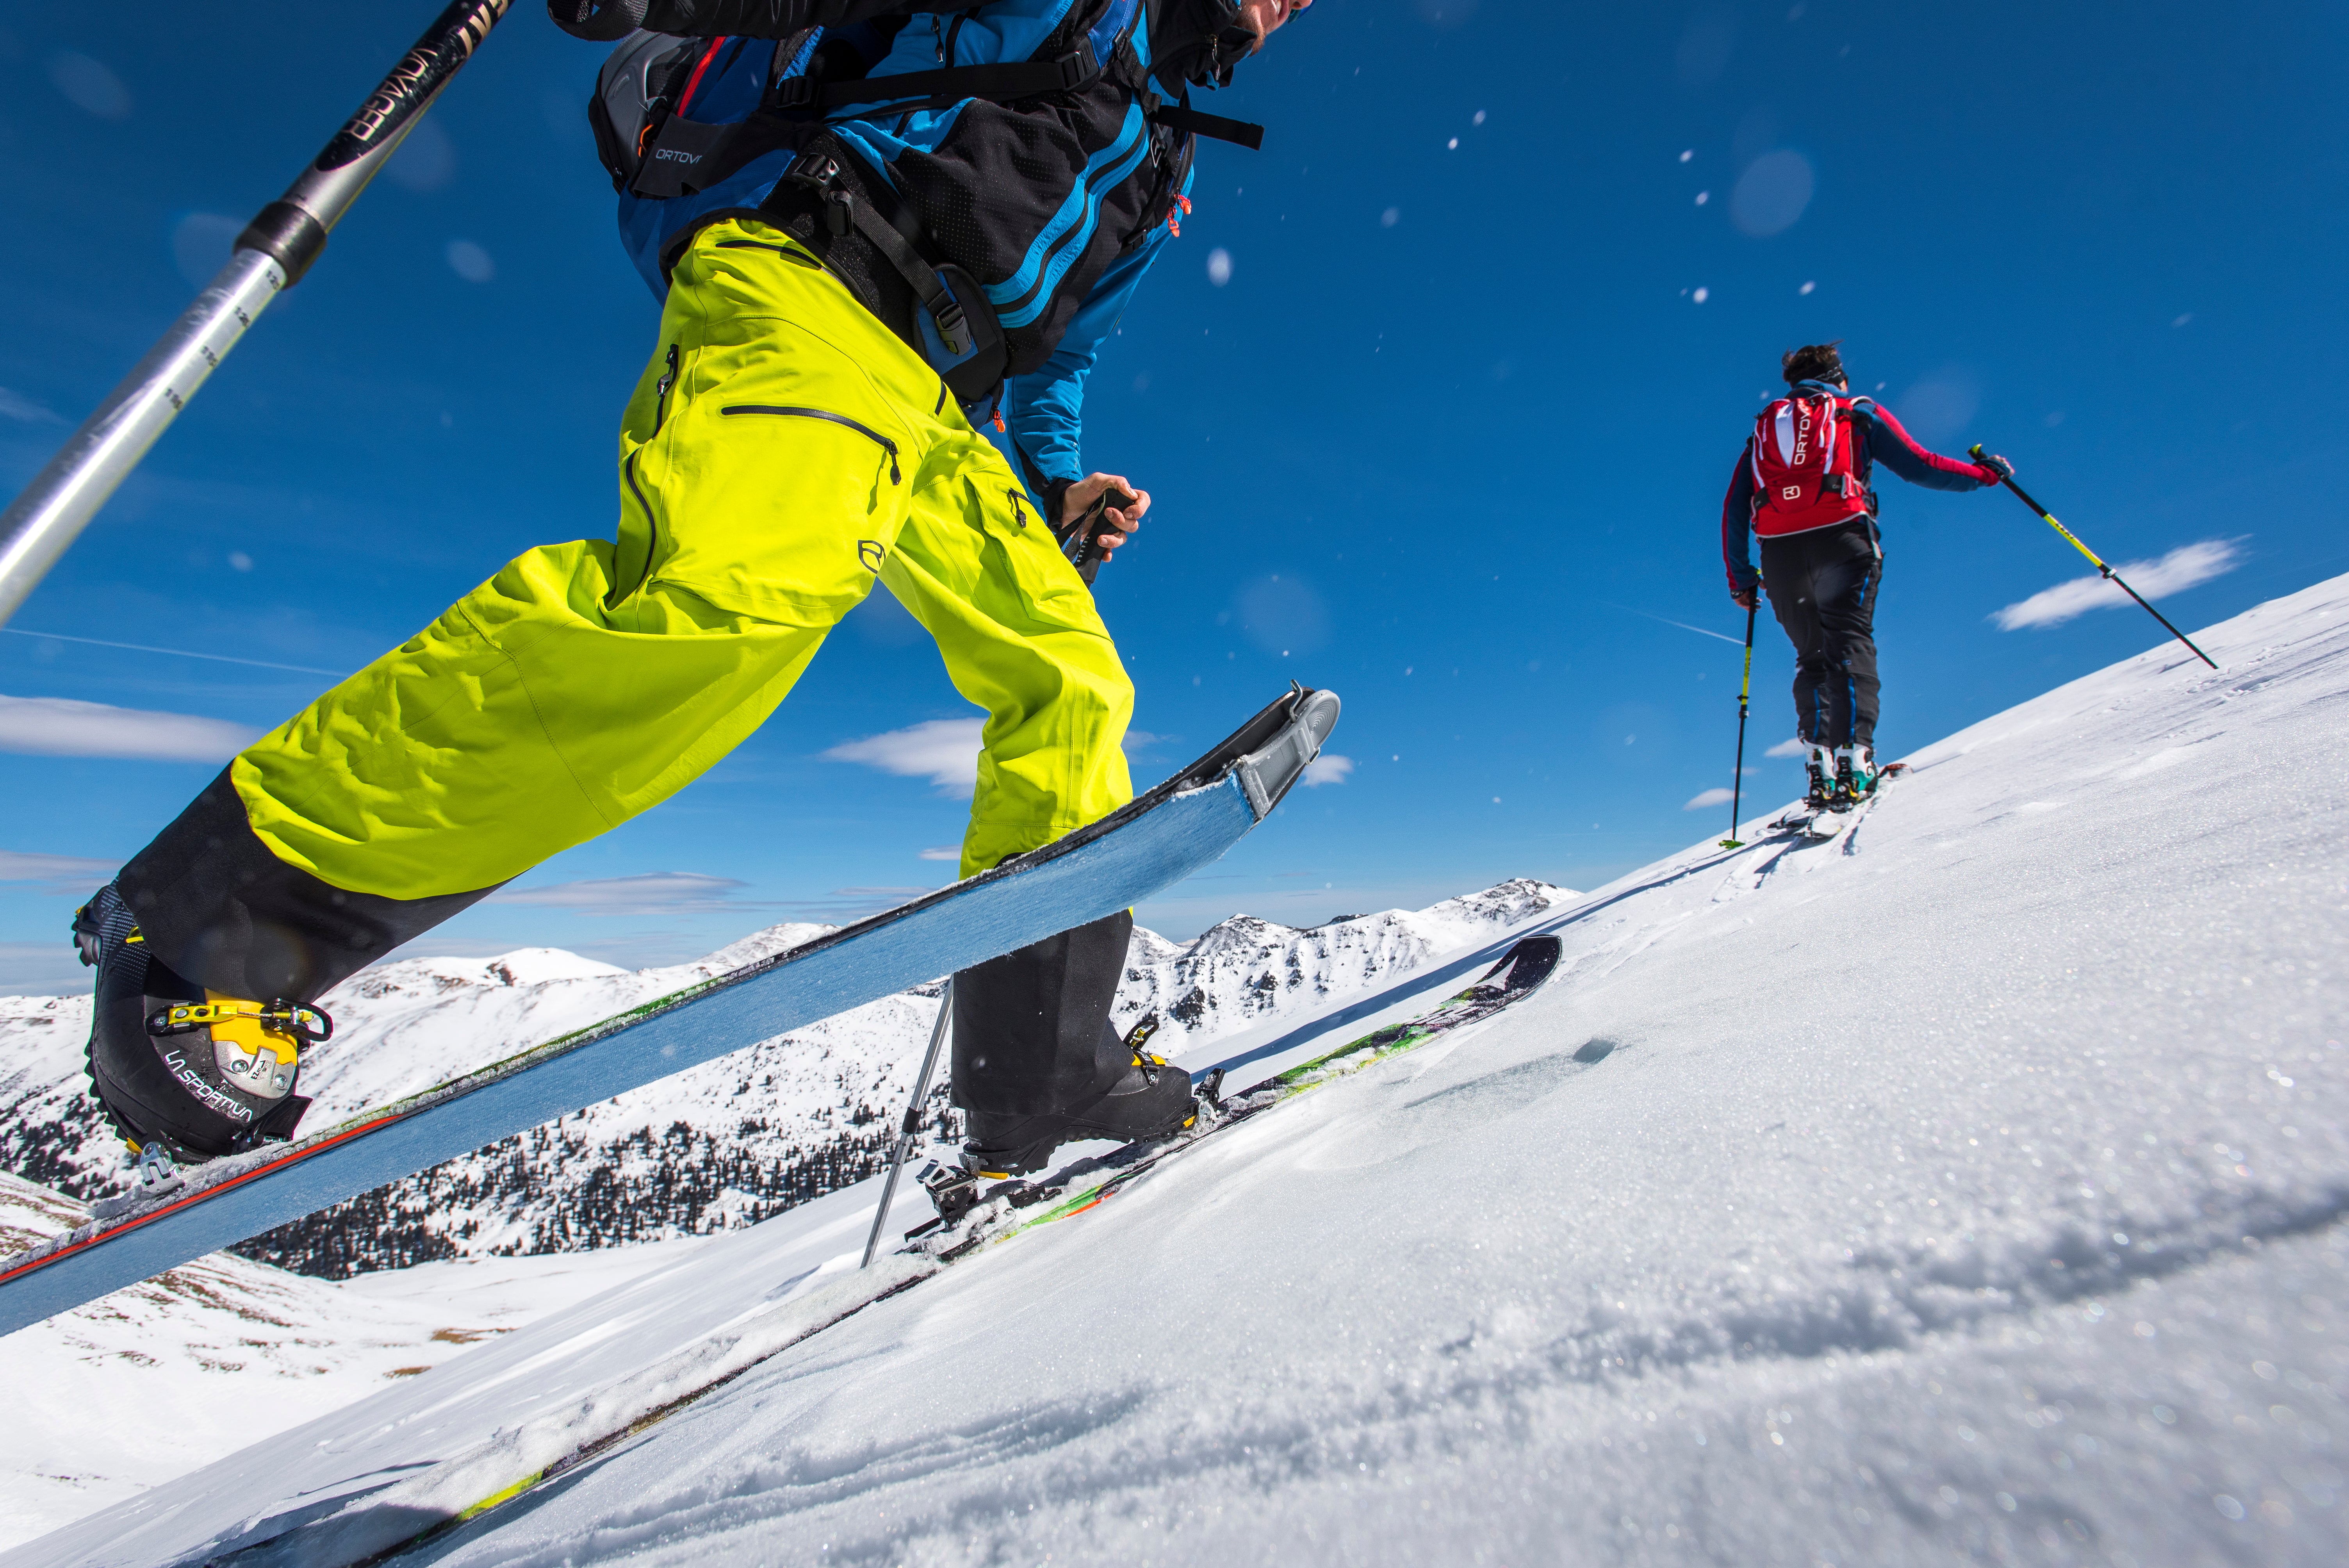 Ski touring is a completely green way to indulge your snowsports habit